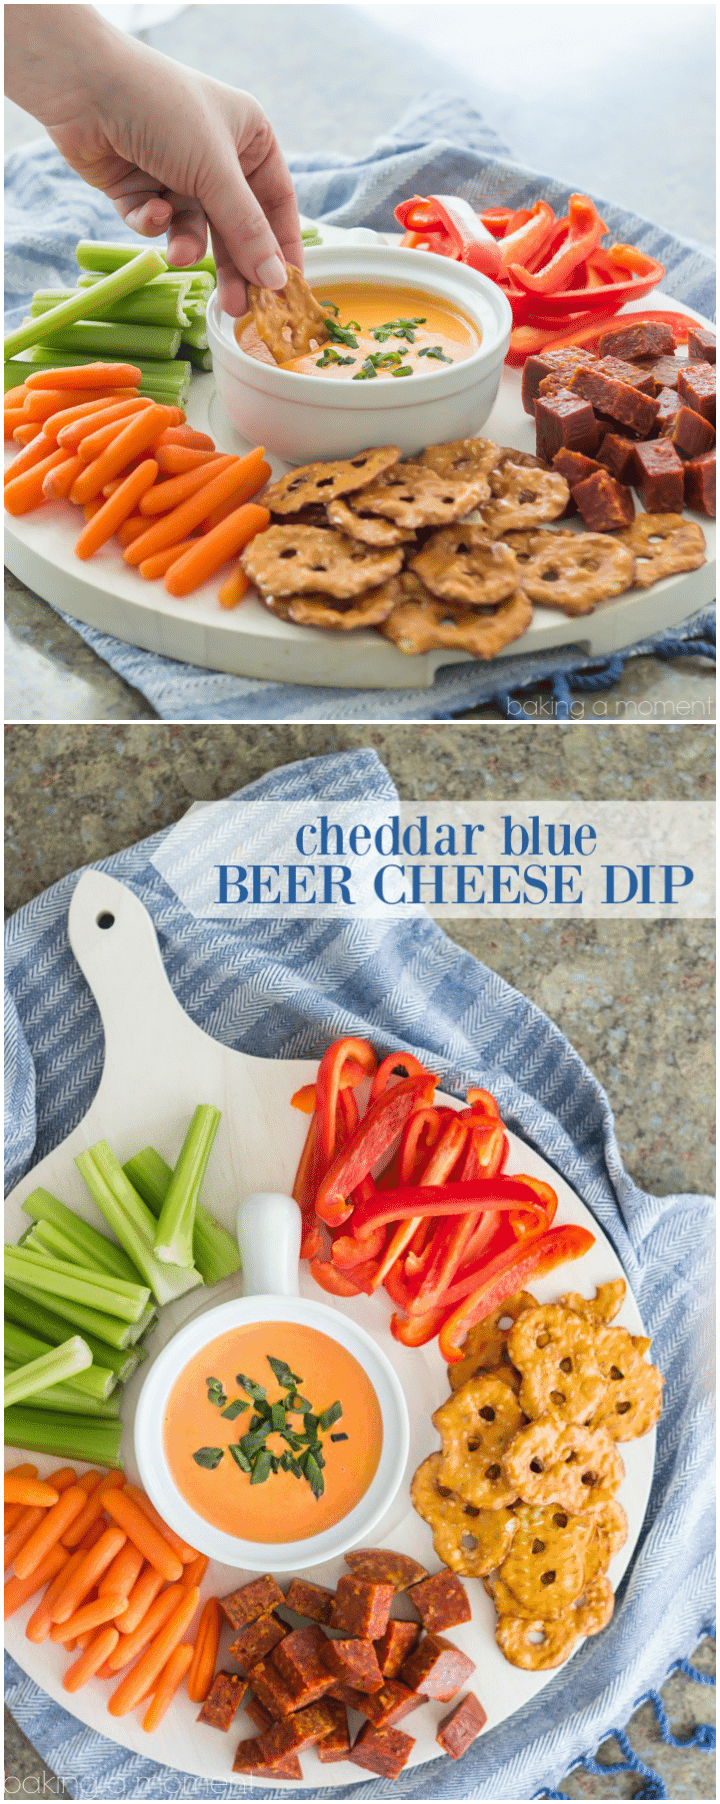 LOVED all the flavors going on in this Cheddar-Blue Beer Cheese Dip! Perfect game-day snack ;) @kitchenaidusa